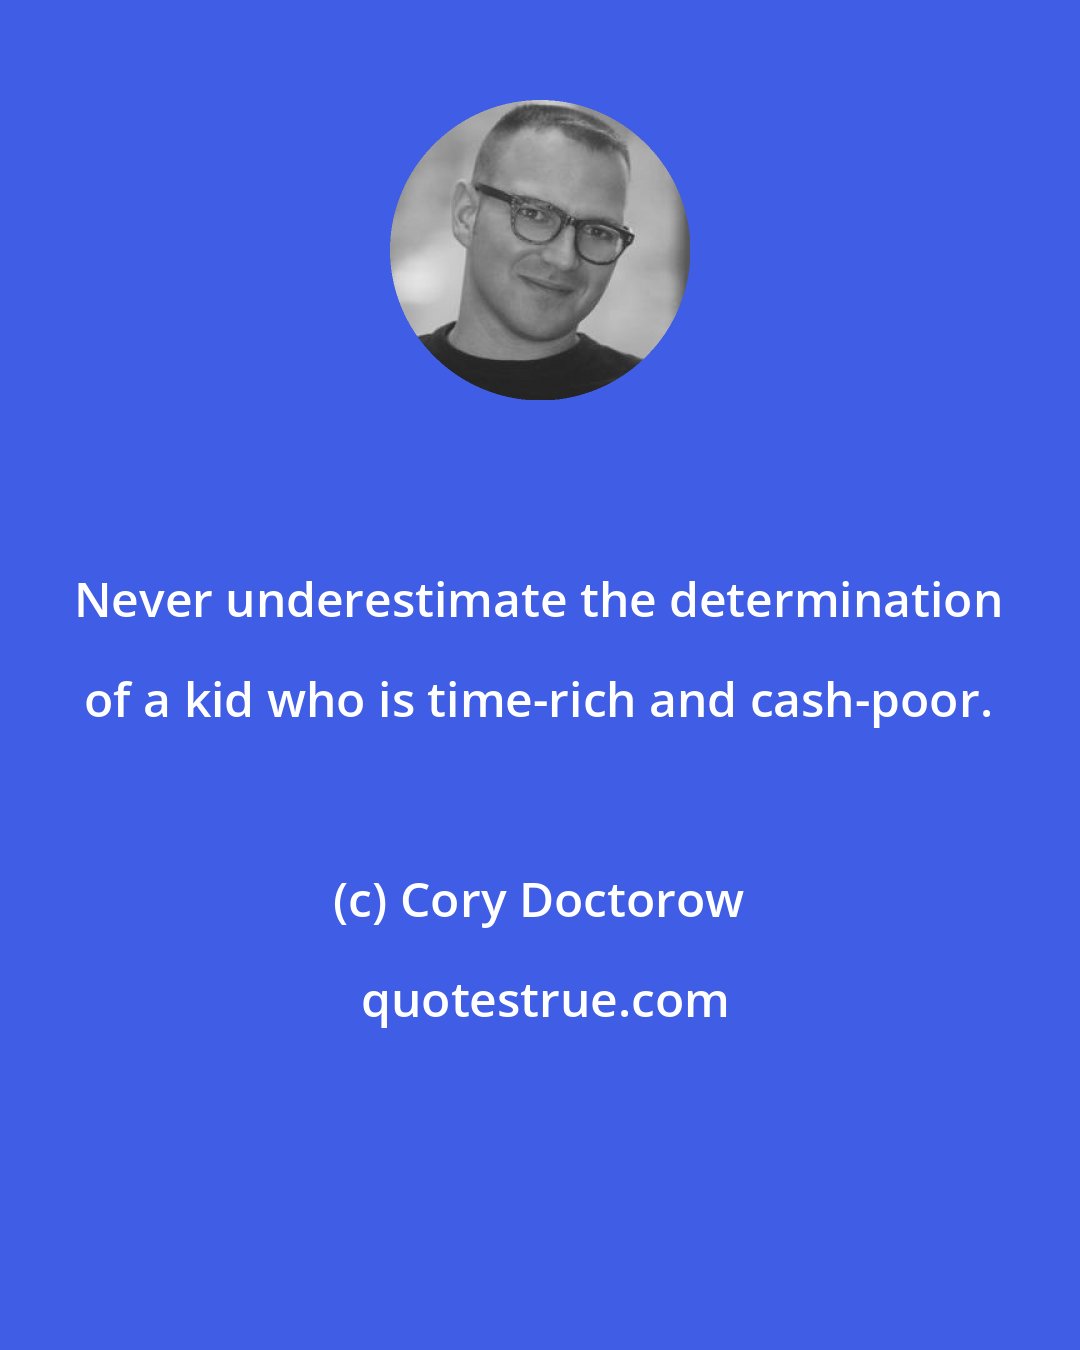 Cory Doctorow: Never underestimate the determination of a kid who is time-rich and cash-poor.